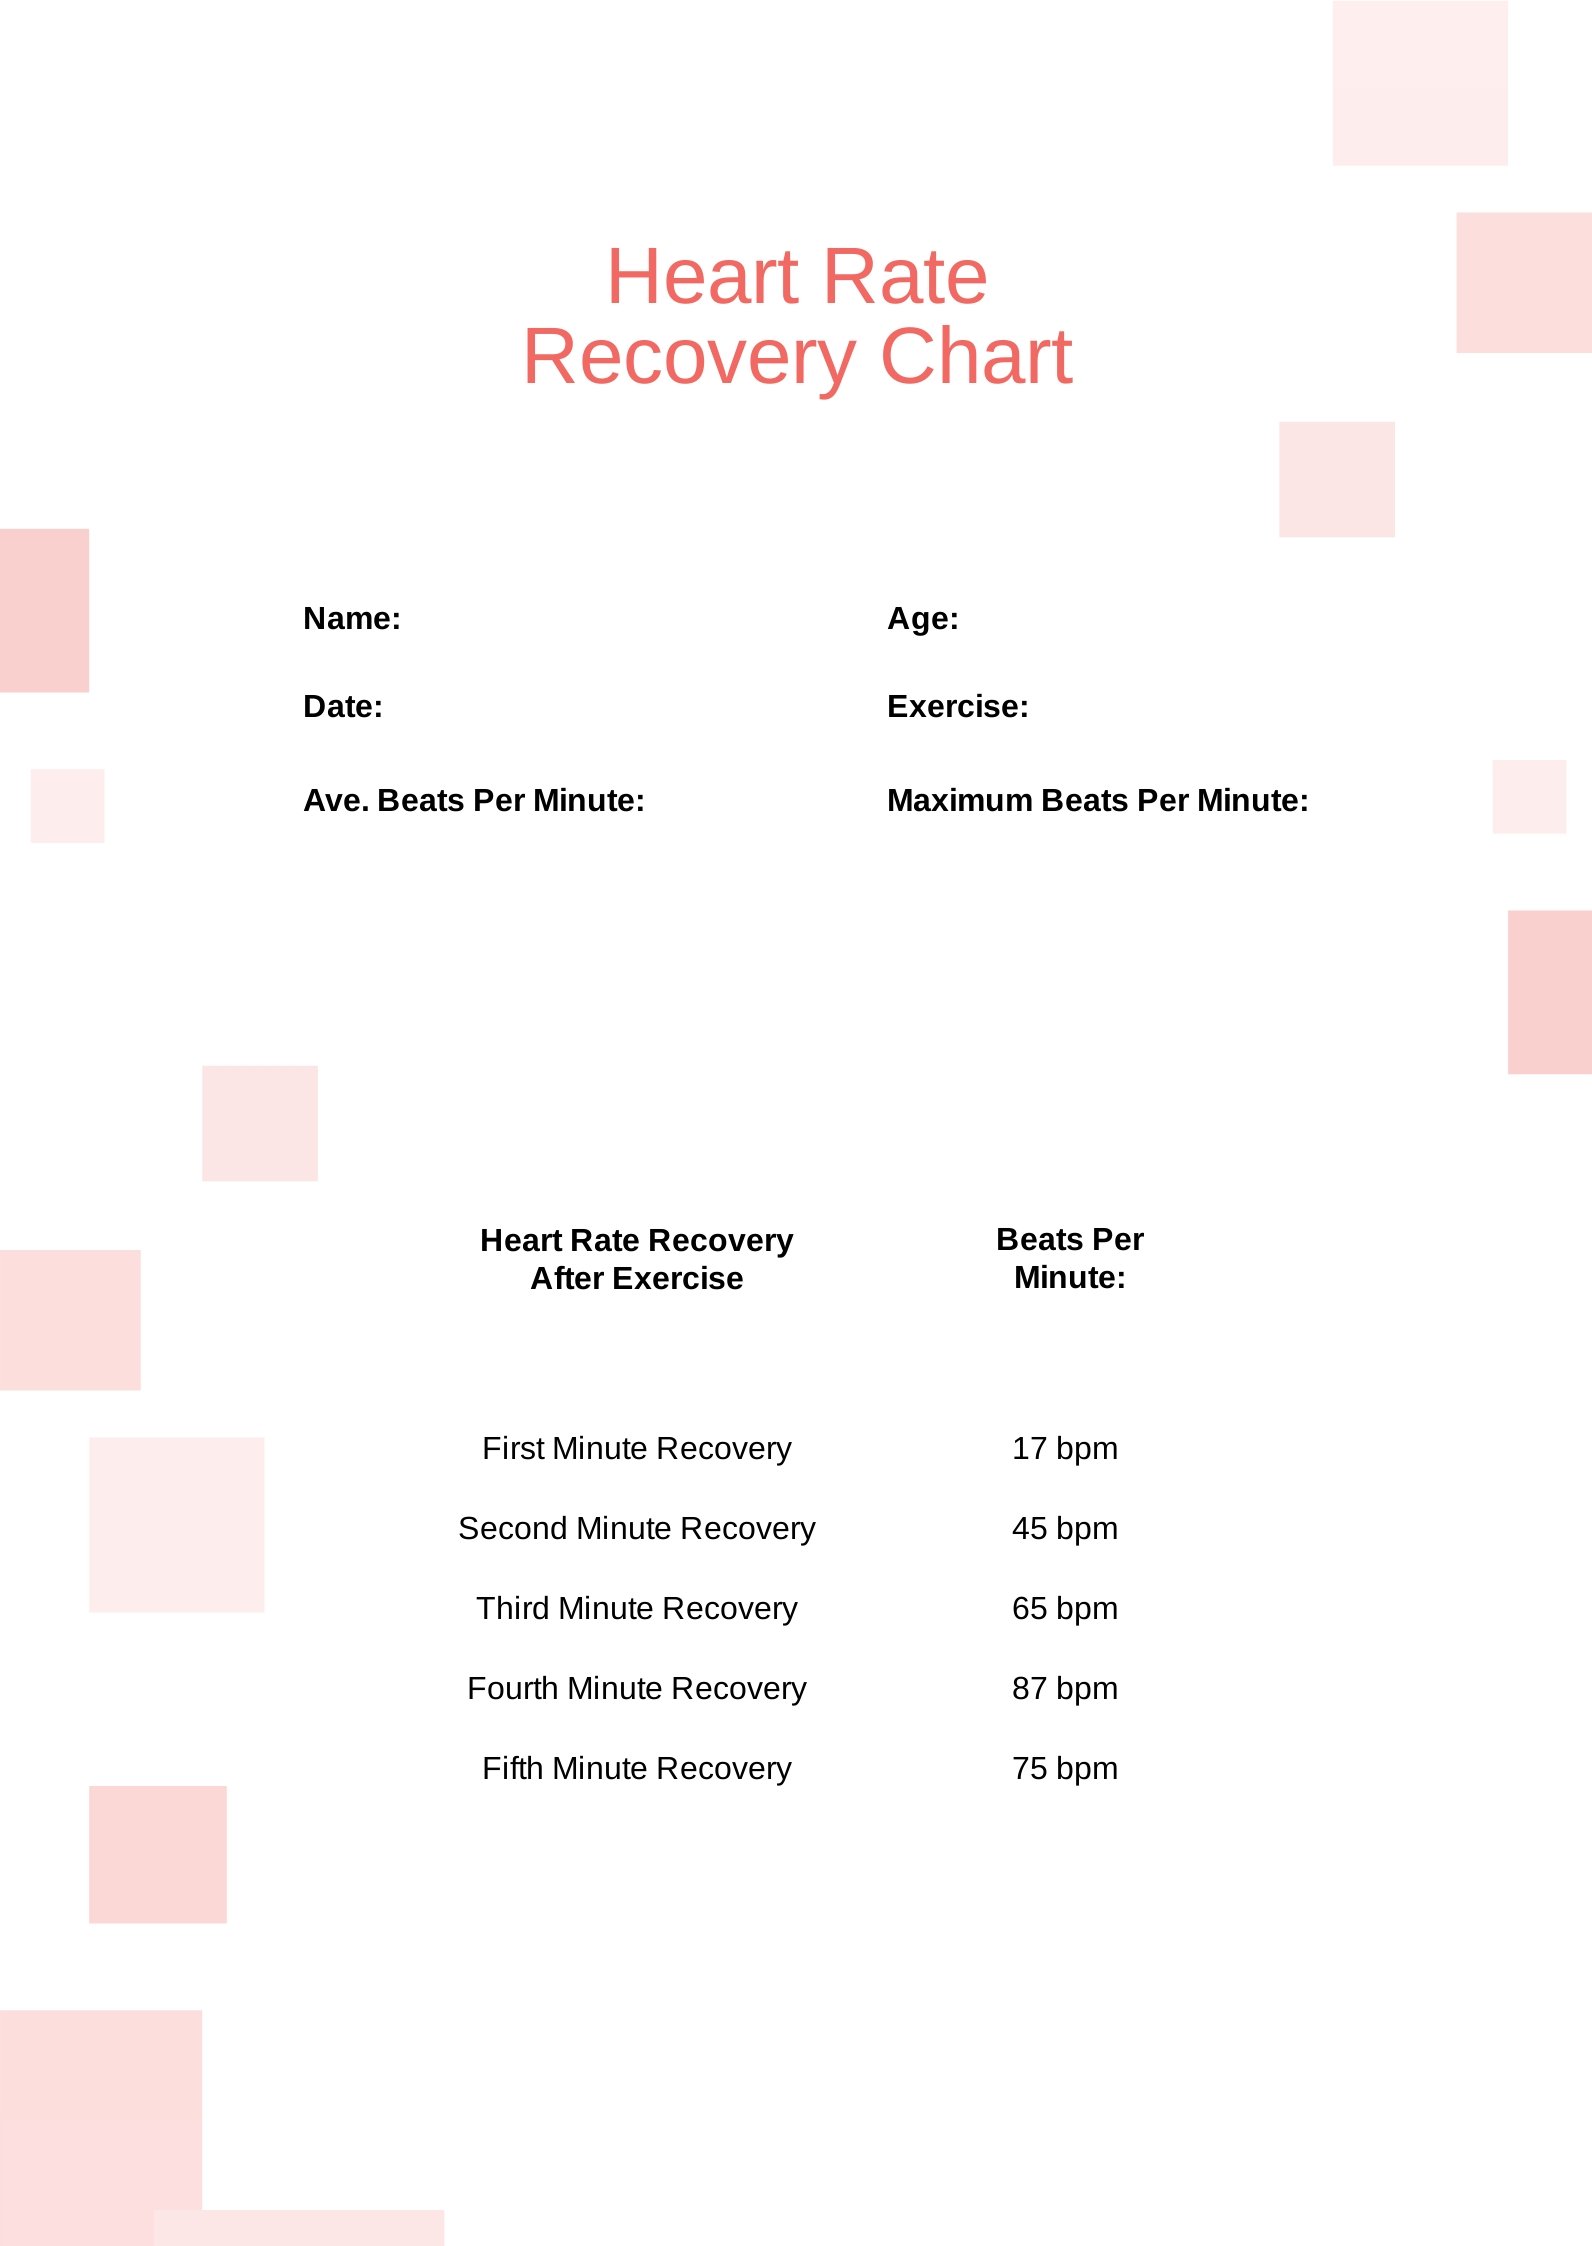 Heart Rate Recovery Chart in PDF